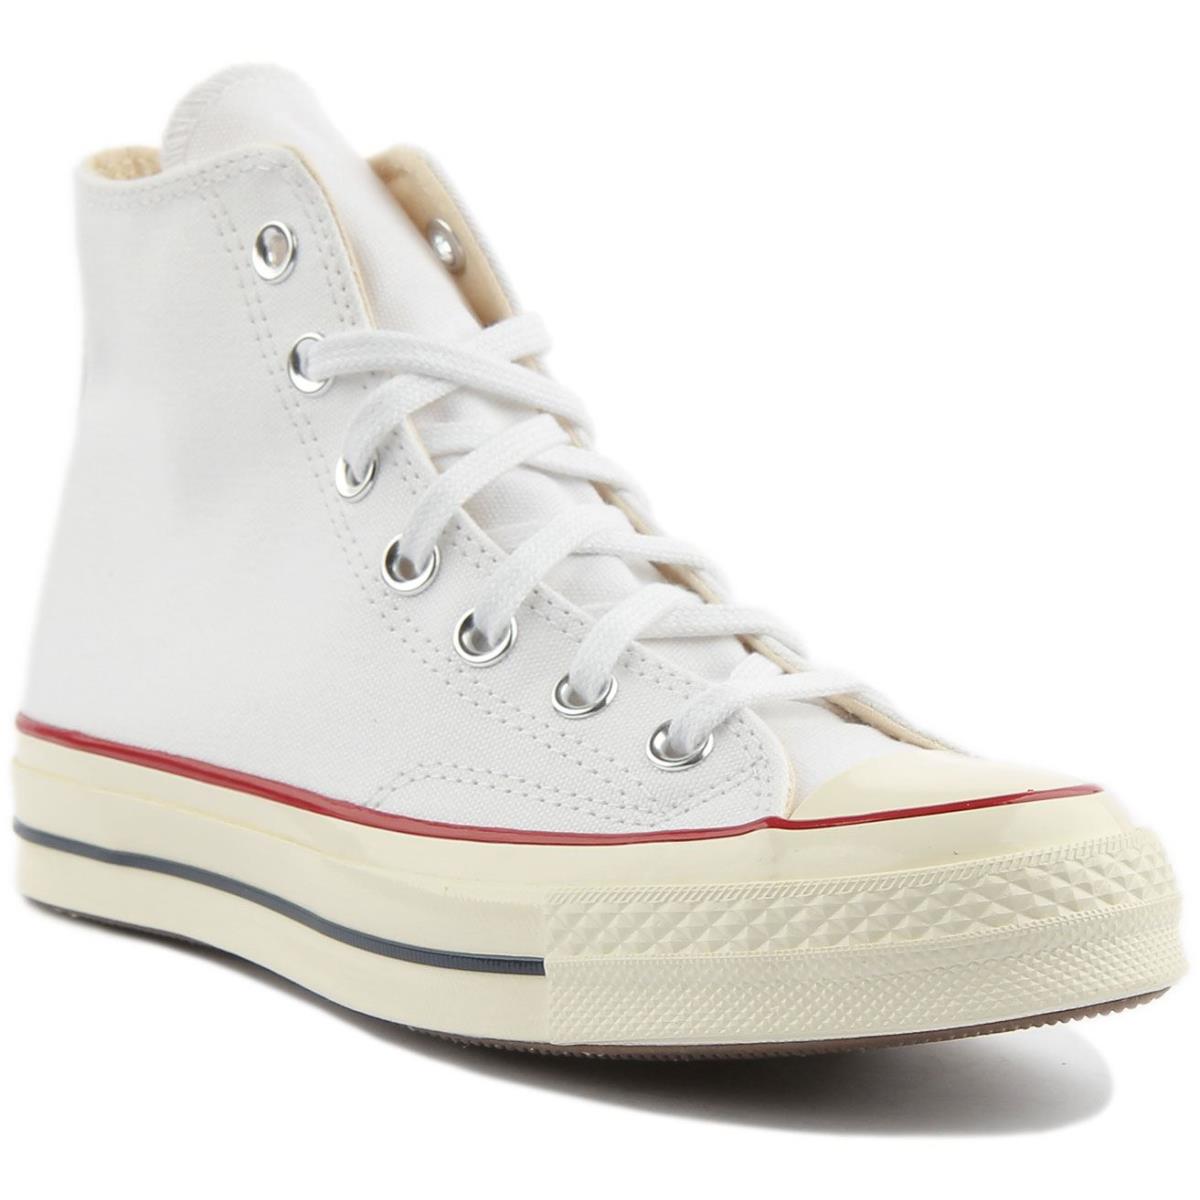 Converse 162056 Chuck 70s Hi Unisex Canvas Sneakers In White Size US 3 - 12 WHITE